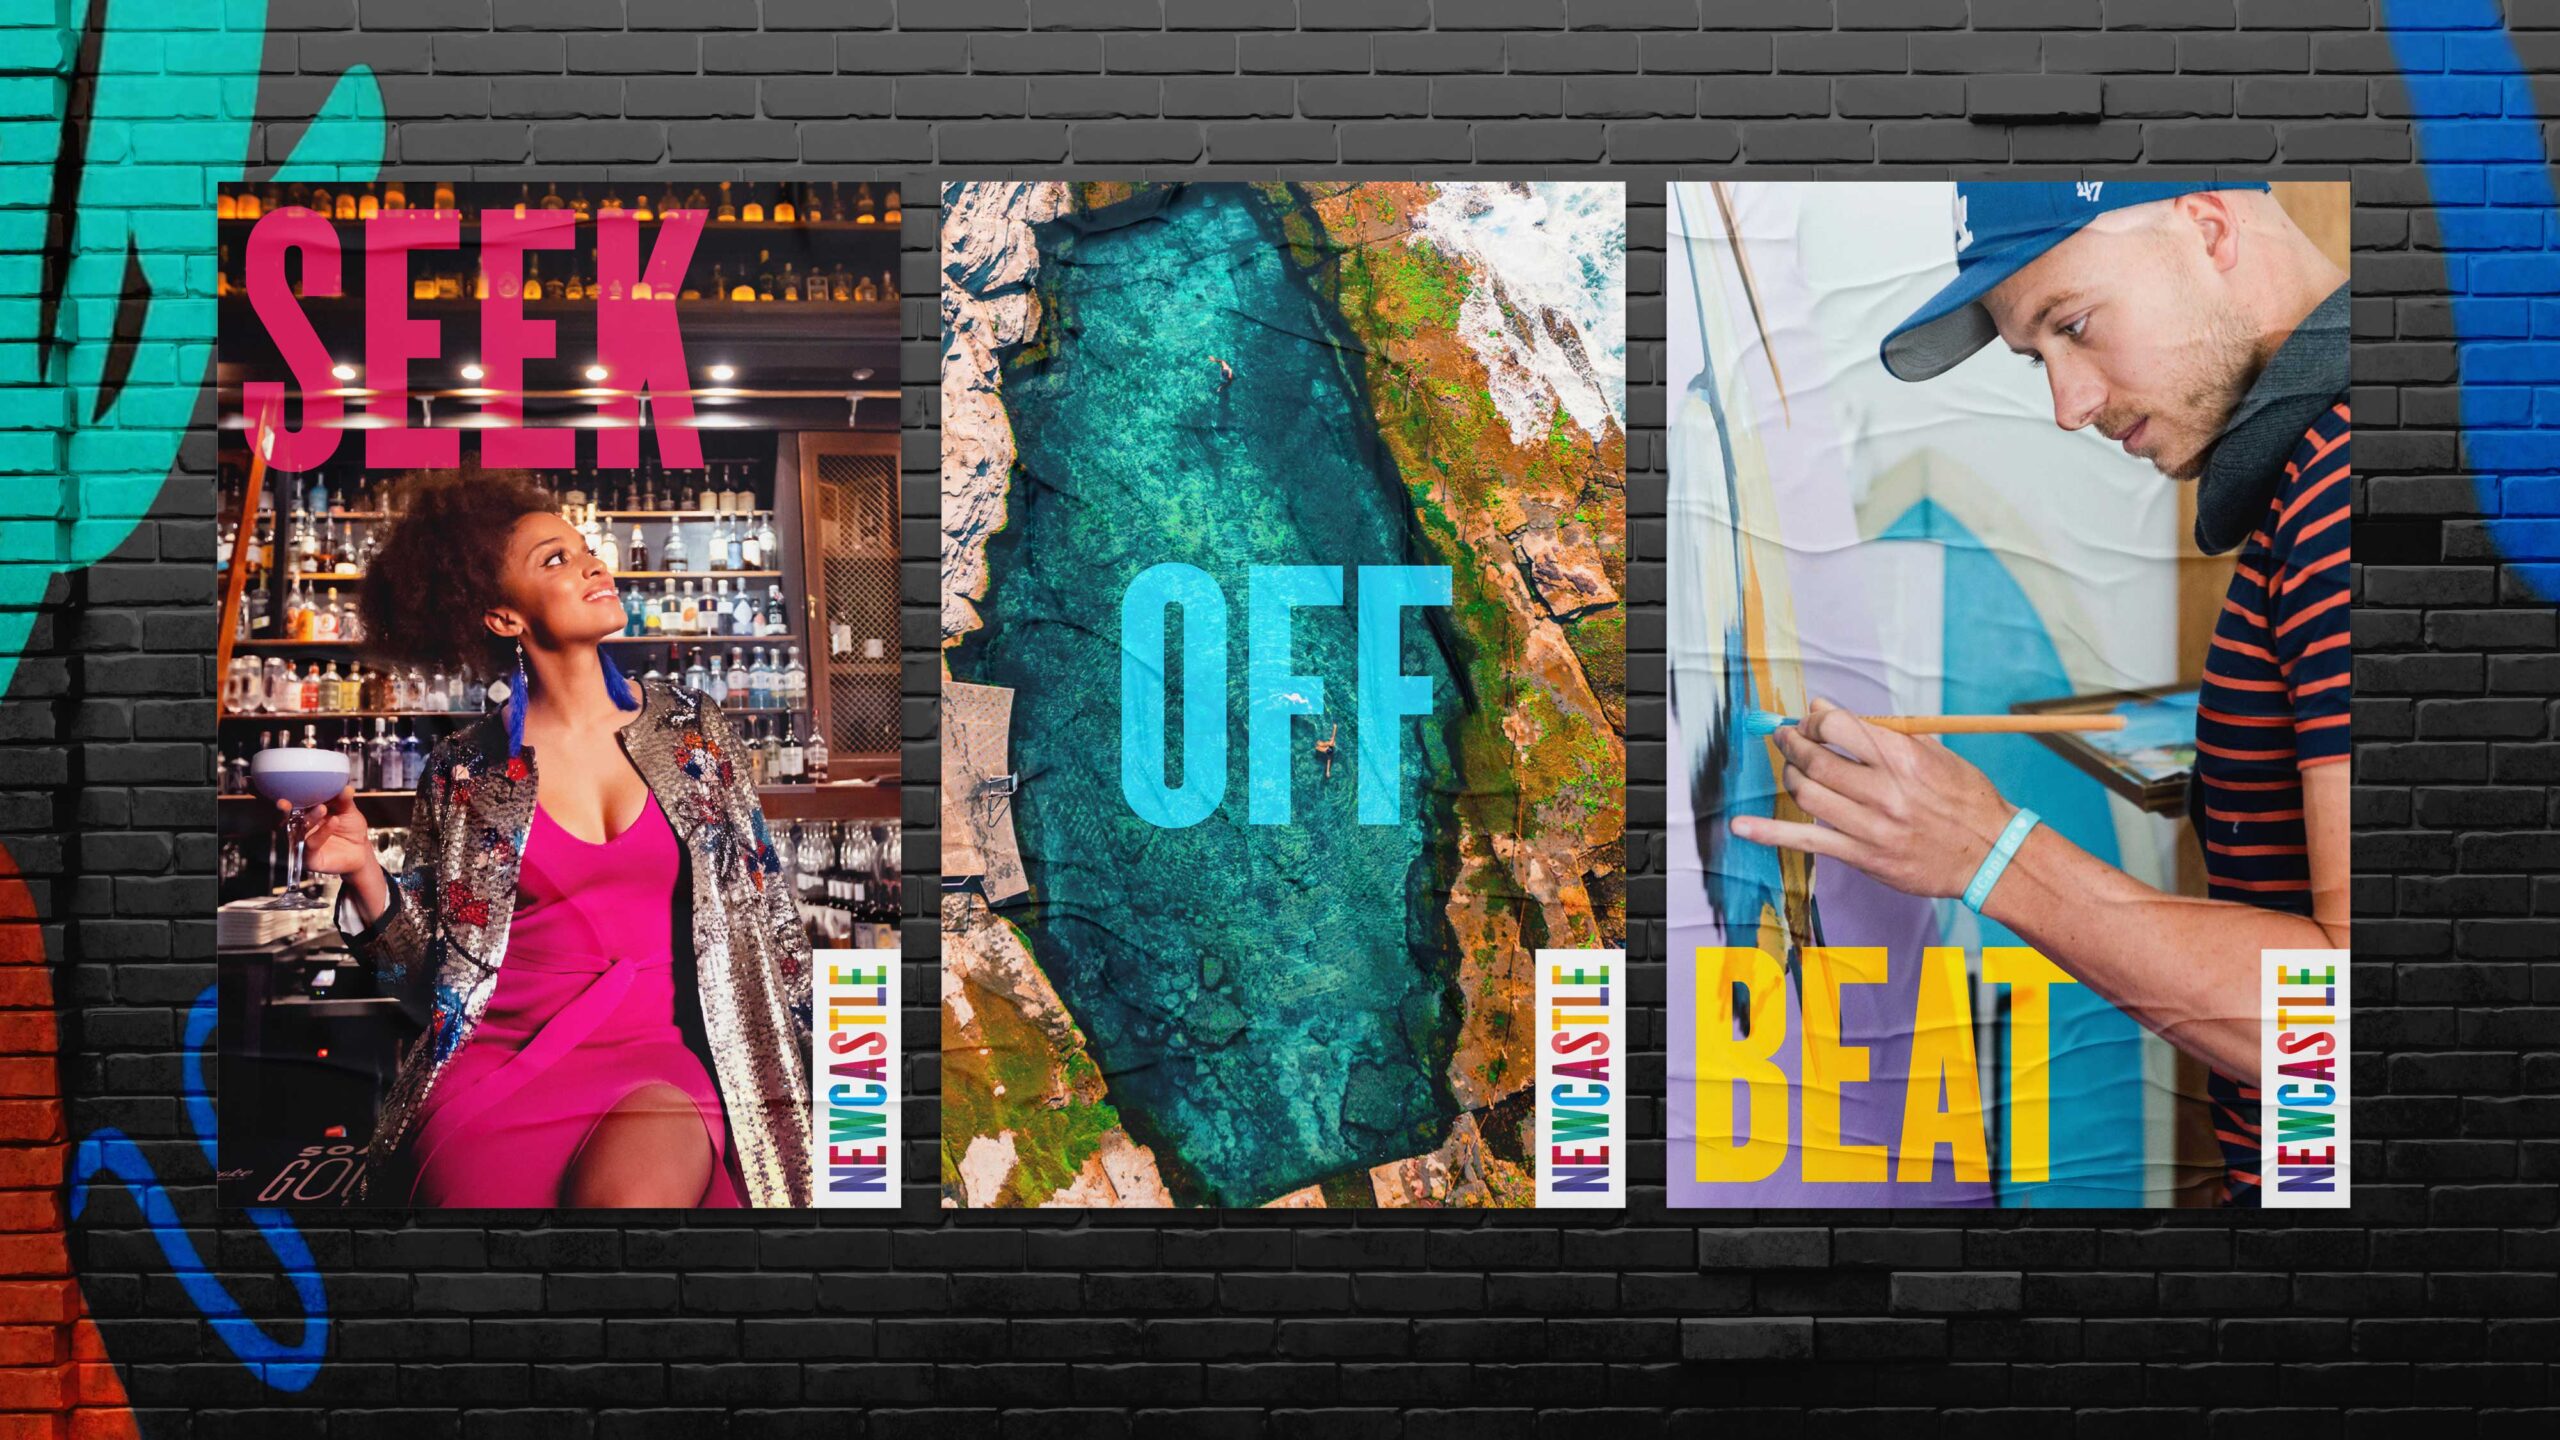 seek off beat campaign posters